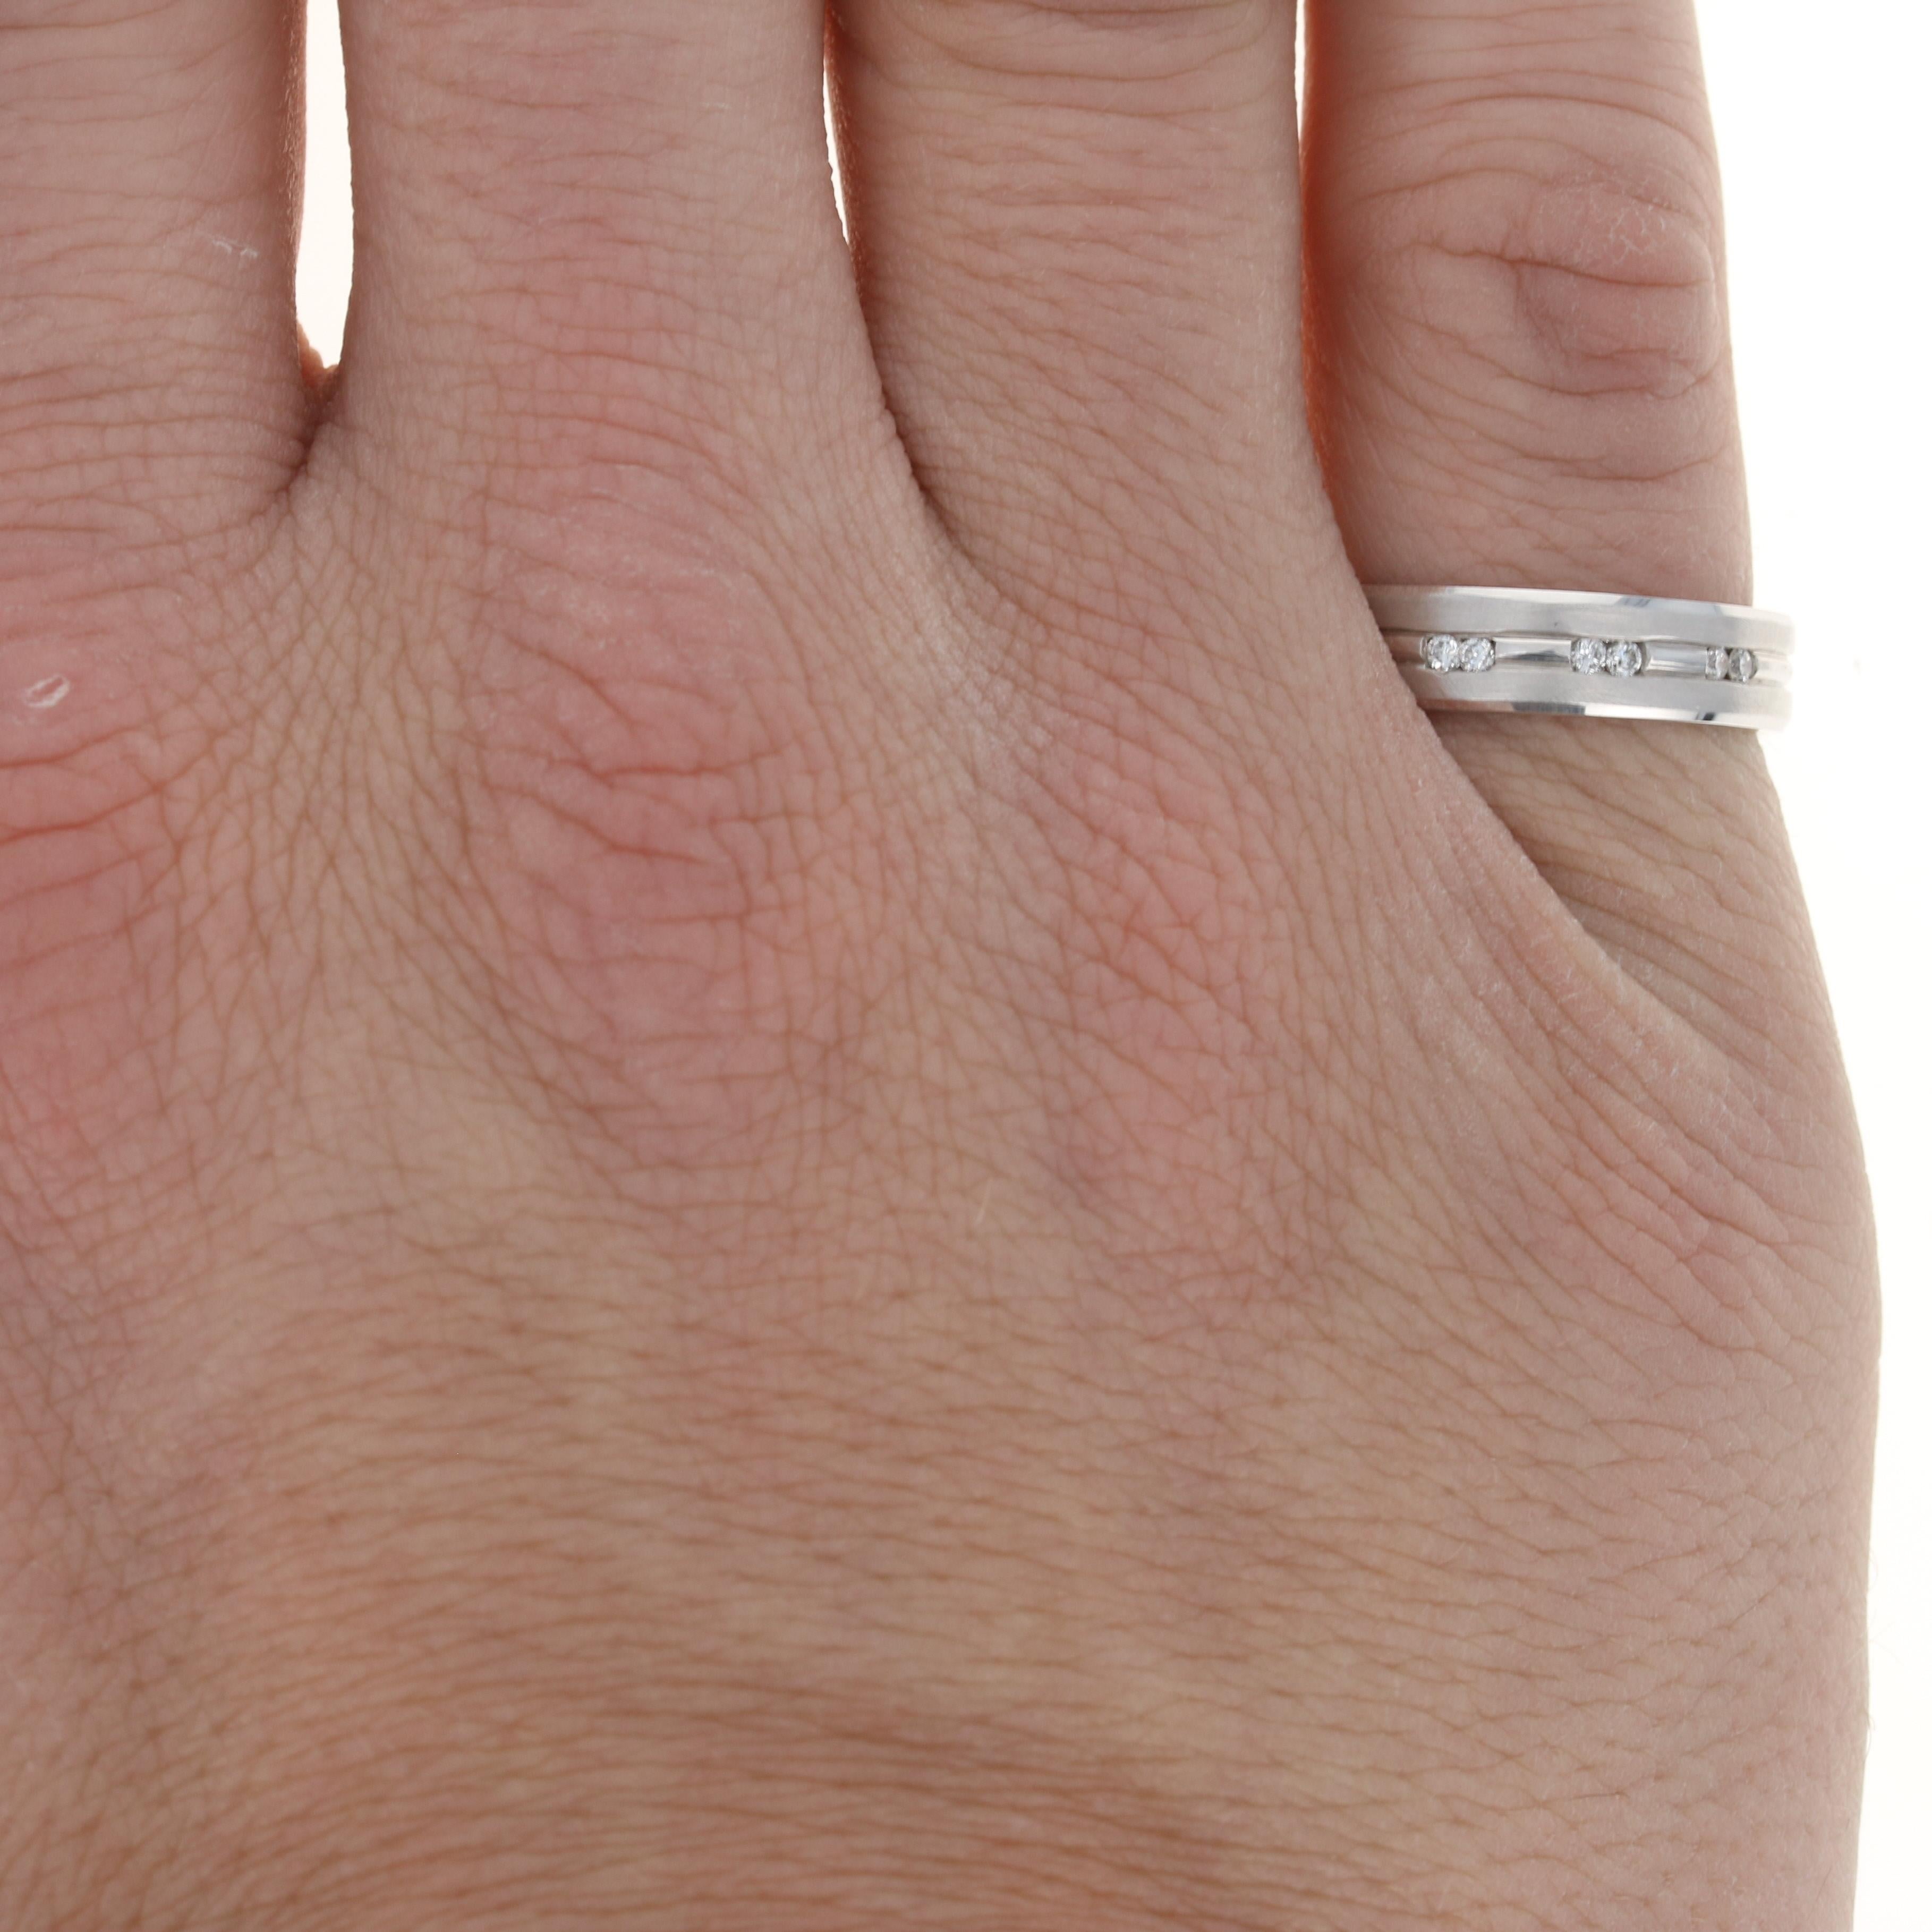 Keep the magic alive when you pledge your love with this fine wedding band! Crafted in 14k white gold, this NEW piece features a comfort-fit band and brushed exterior adorned with six natural diamonds. The round cut diamonds are inset in the center